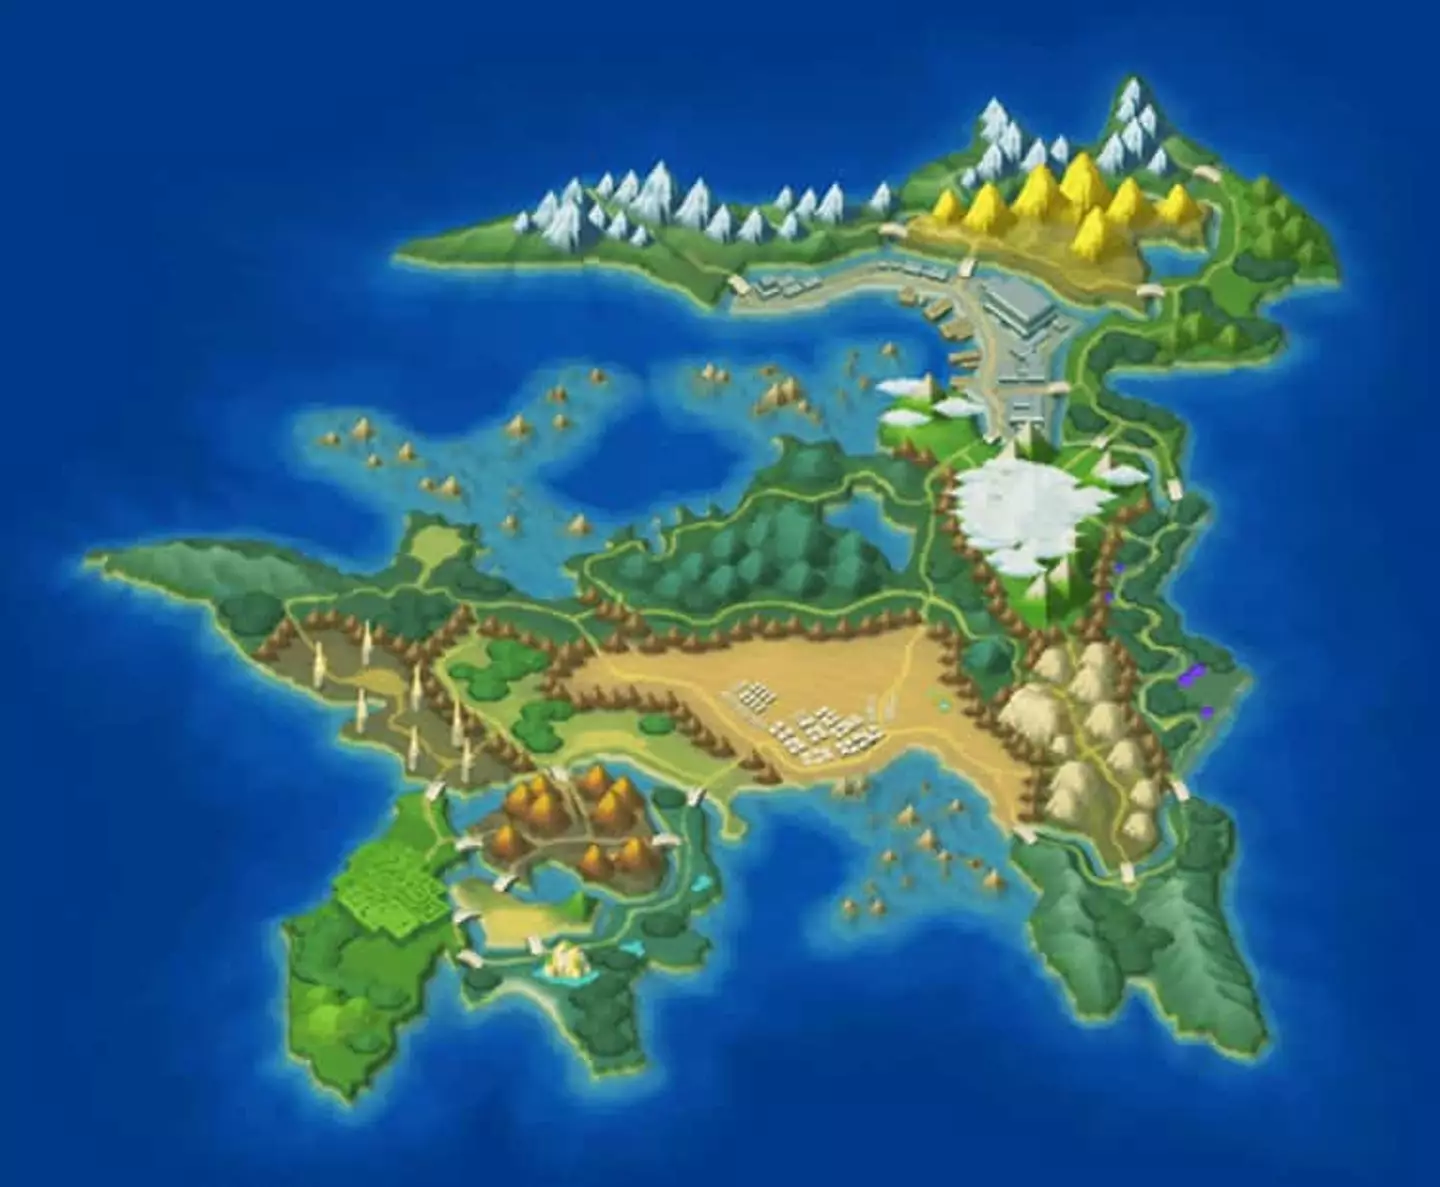 Here's the map of the Ransei region, which definitely doesn't resemble anything in particular at all /